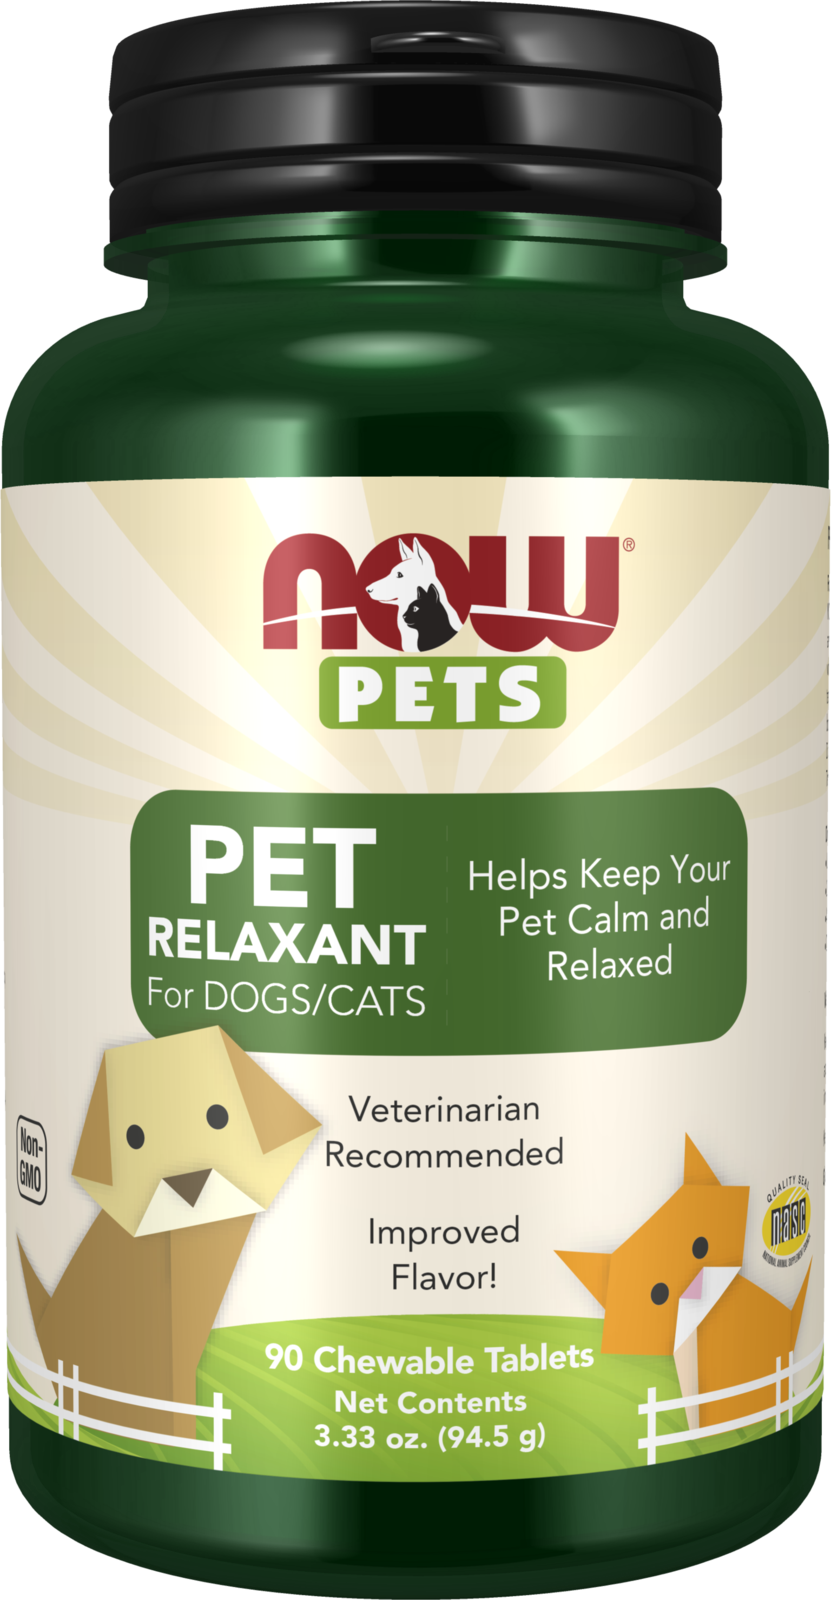 Pet Relaxant - 90 Chewable Tablets for Dogs & Cats Bottle Front